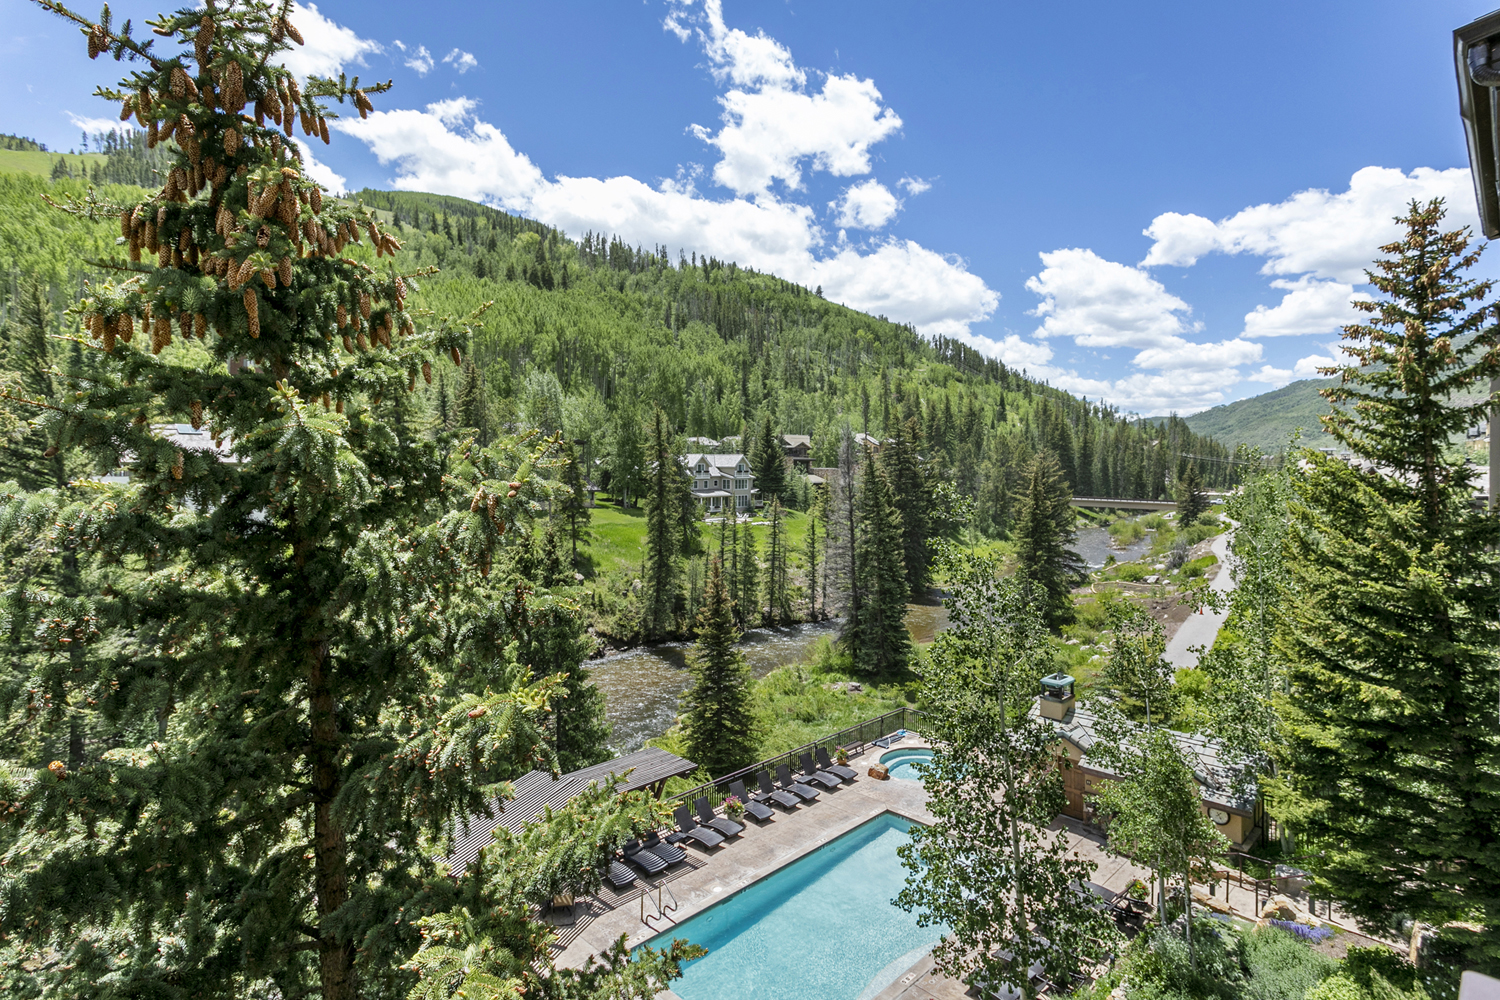 The Antlers at Vail creek-side year-round pool and hot tubs give guests the chance to cool off and enjoy the view.